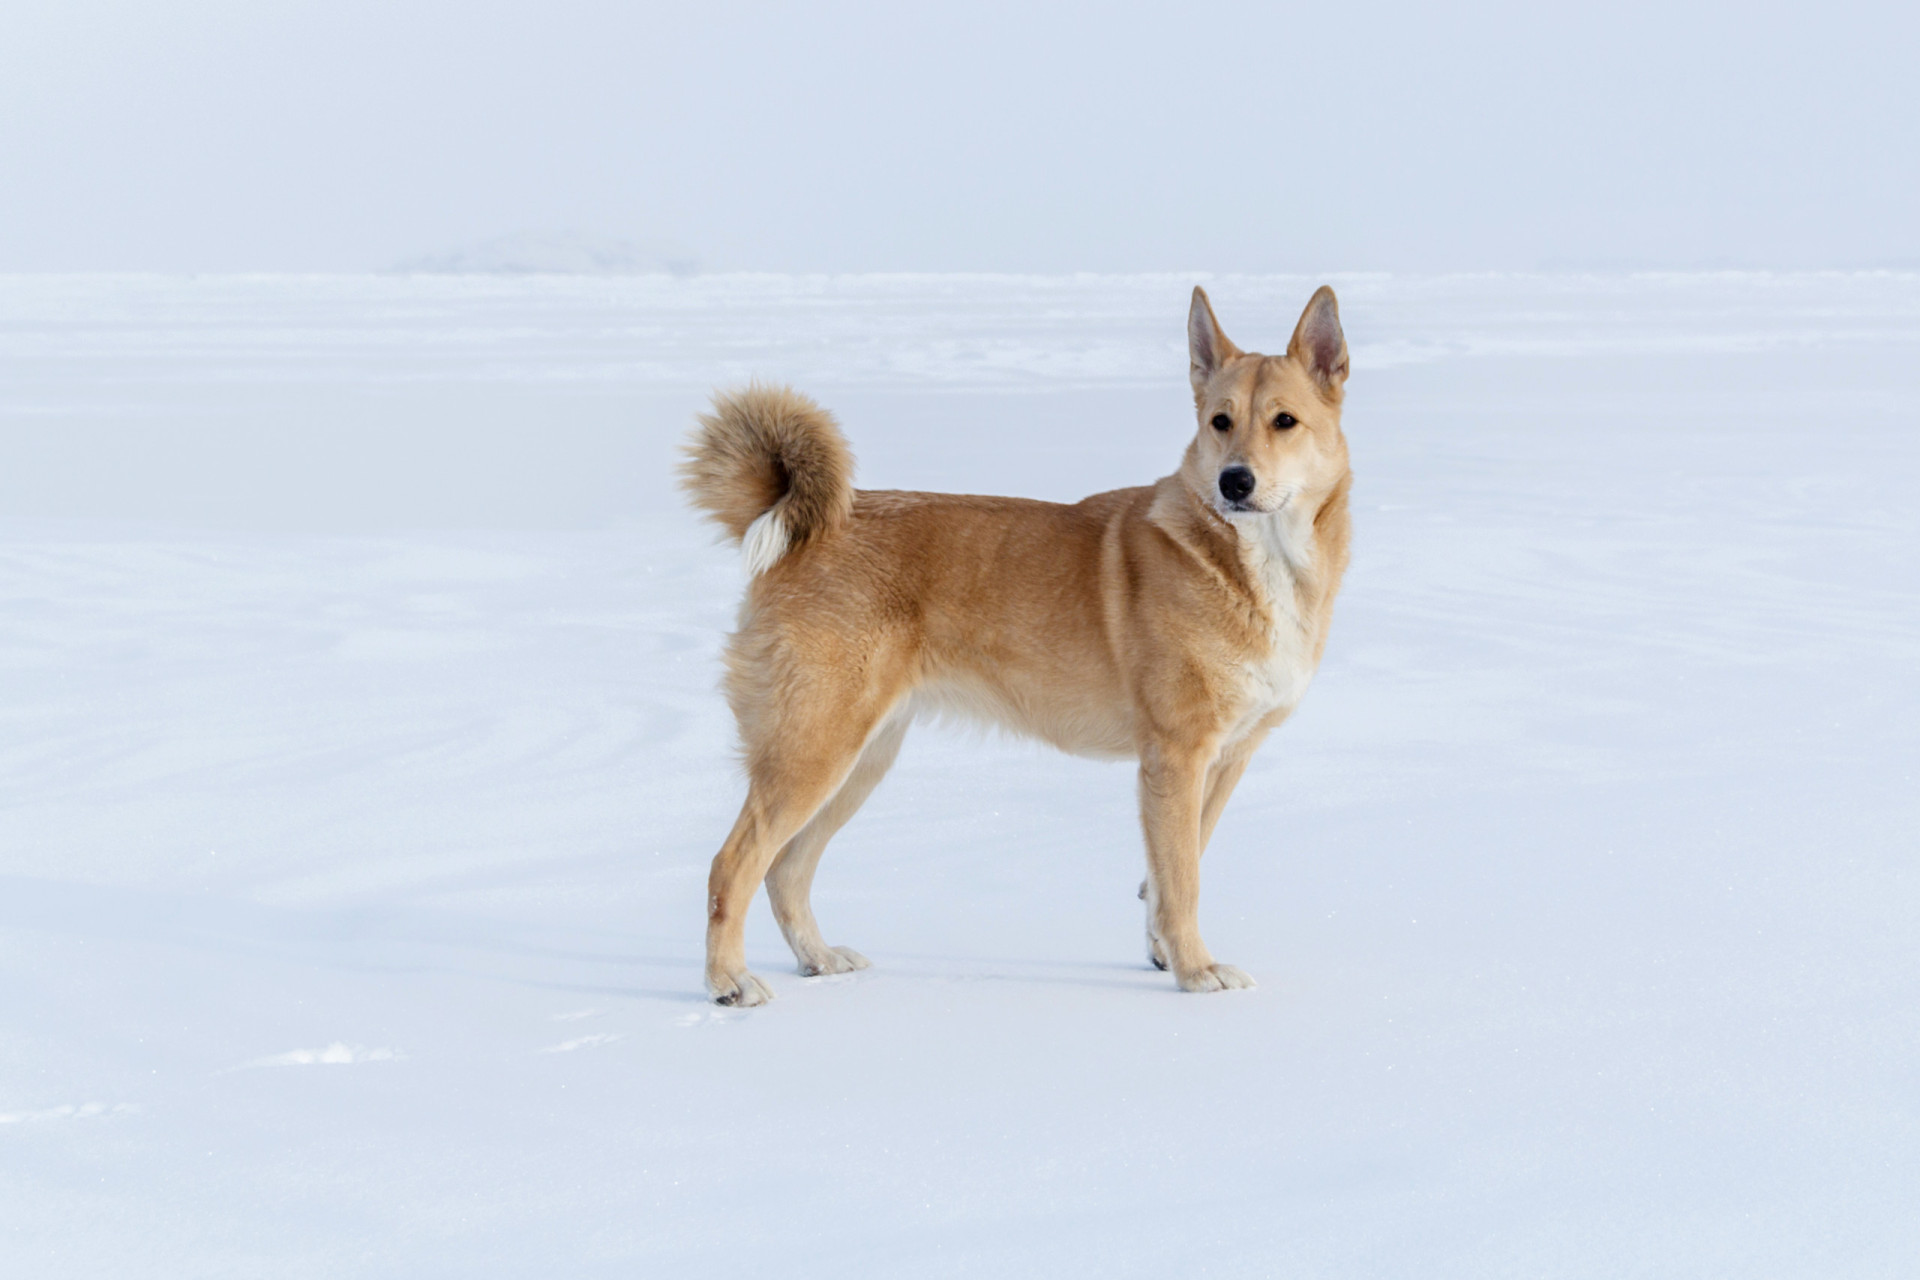 <p>The territorial Canaan is a great breed for a watchdog. They're affectionate with their owners, but dislike strangers. One of the oldest breeds around, they can live up to 15 years. </p><p><a href="https://www.msn.com/en-us/community/channel/vid-7xx8mnucu55yw63we9va2gwr7uihbxwc68fxqp25x6tg4ftibpra?cvid=94631541bc0f4f89bfd59158d696ad7e">Follow us and access great exclusive content every day</a></p>